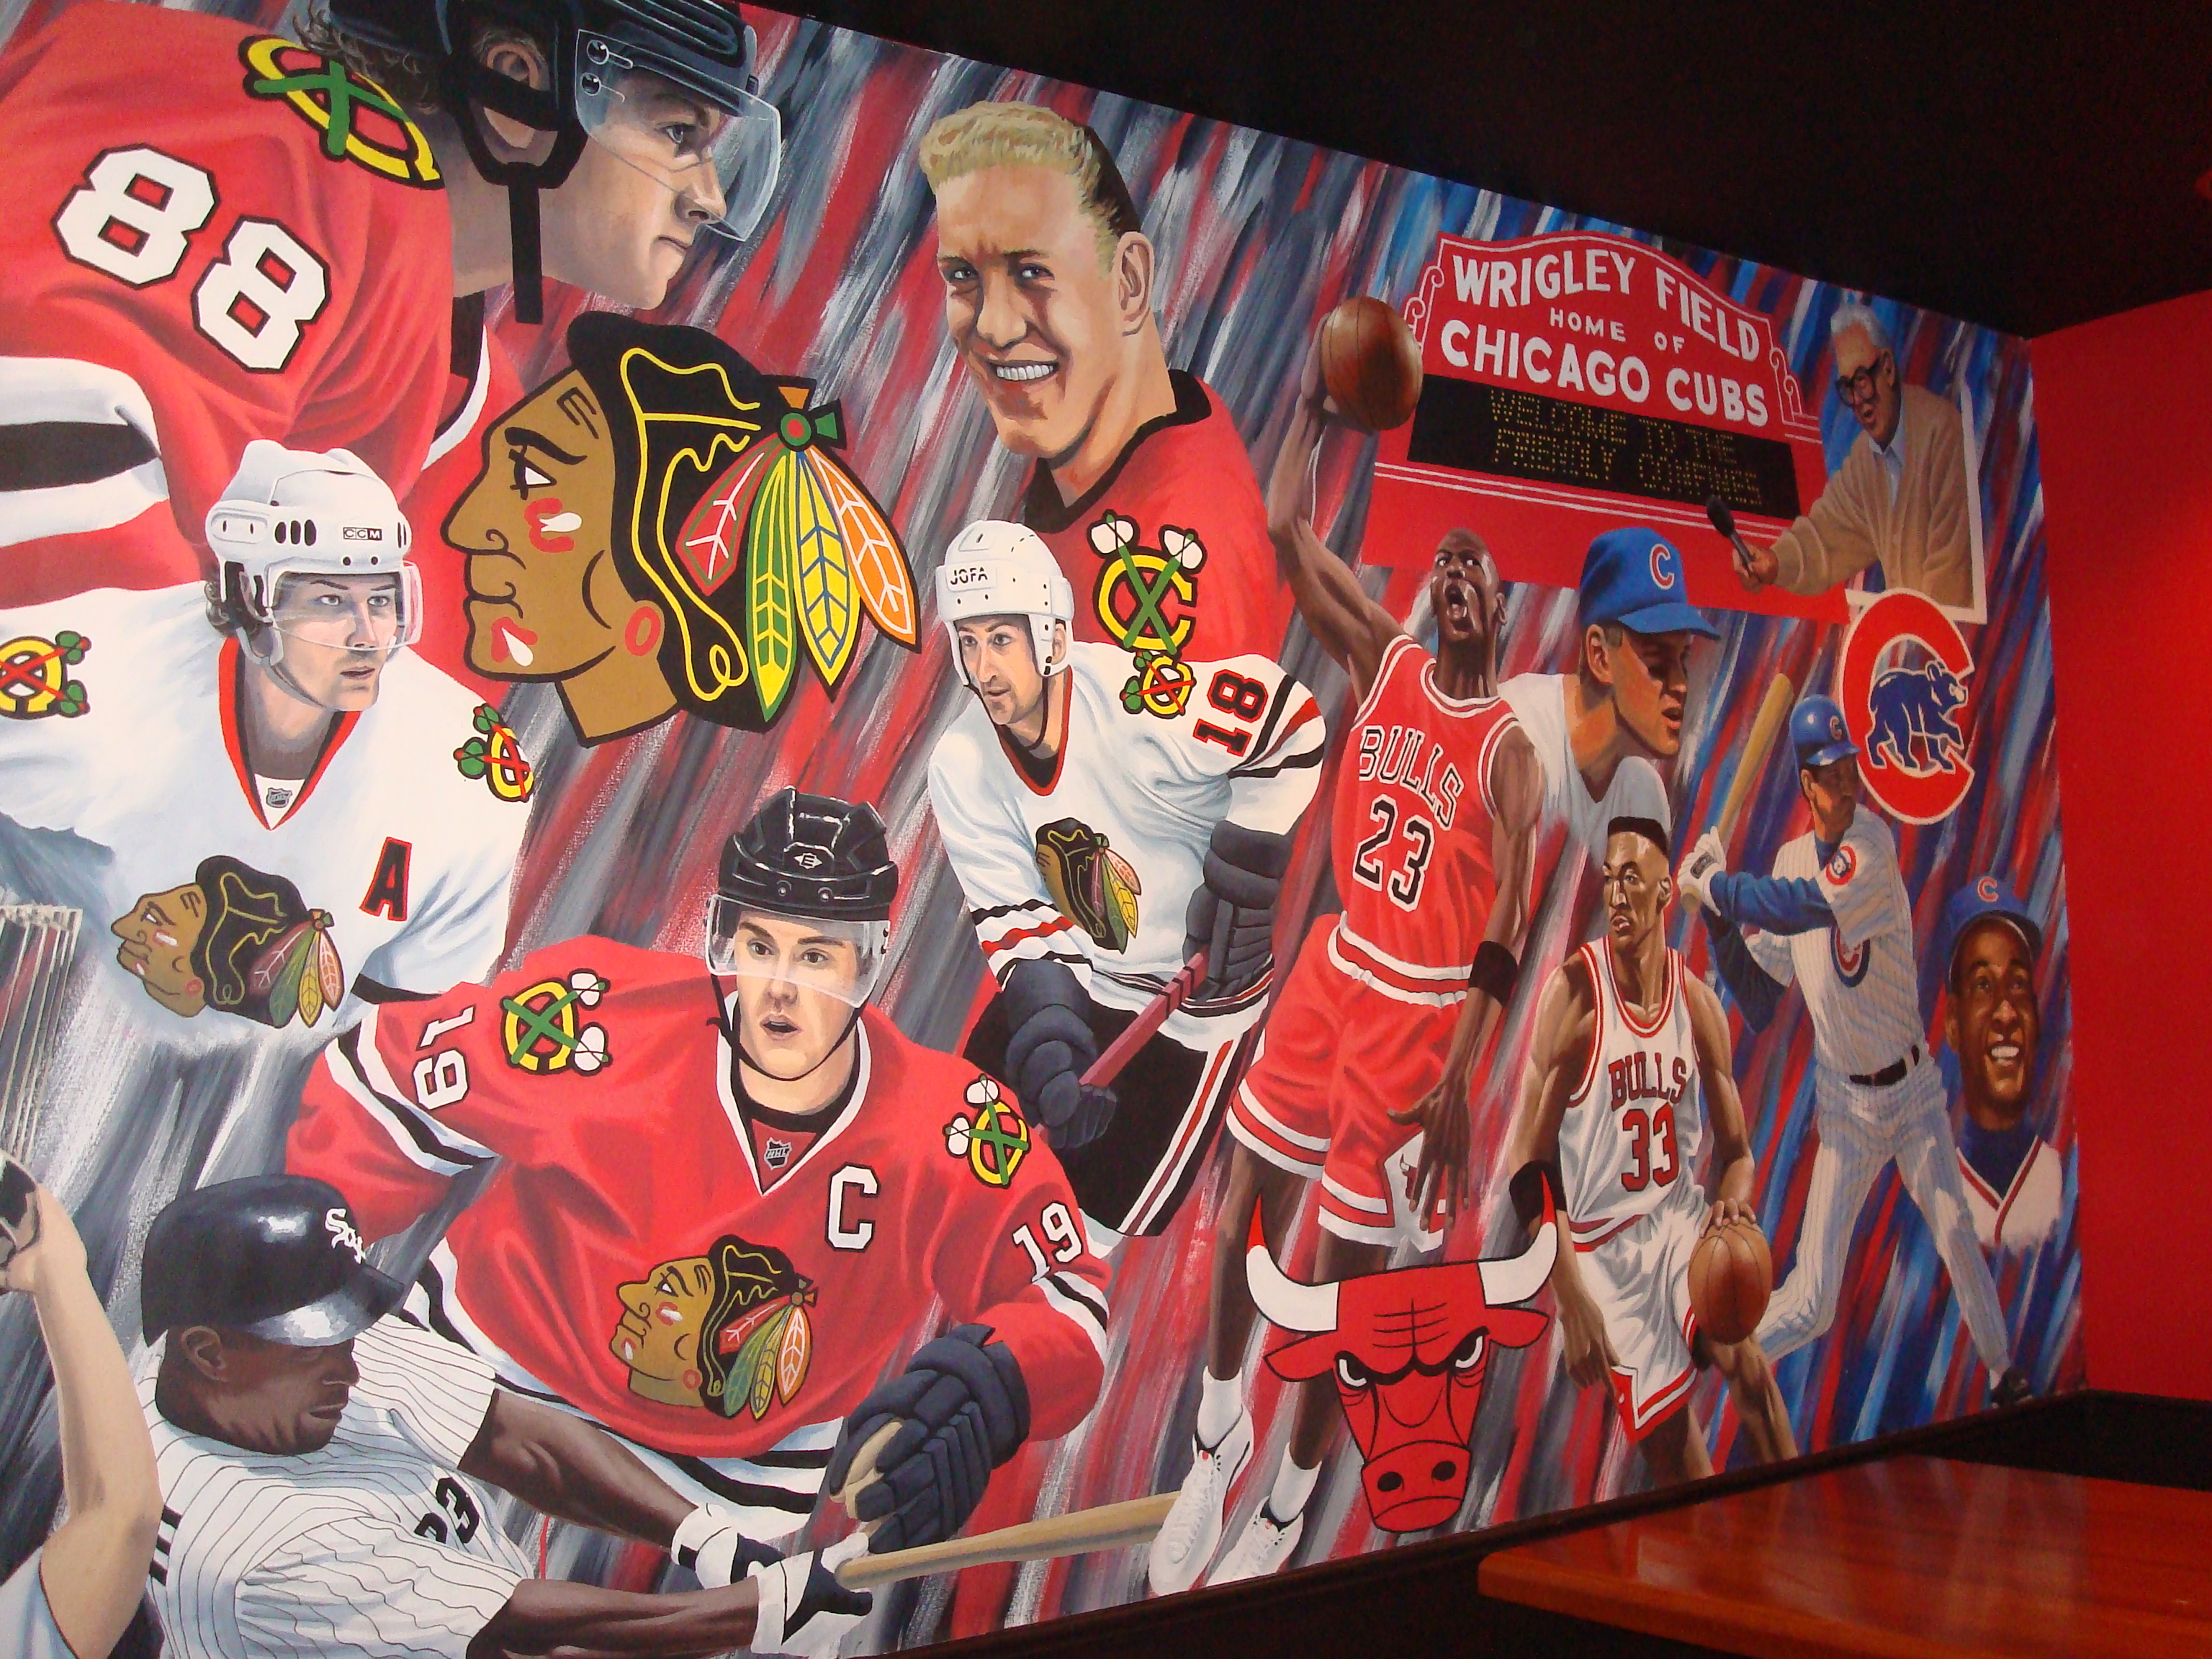 Chicago sports games tickets and schedules